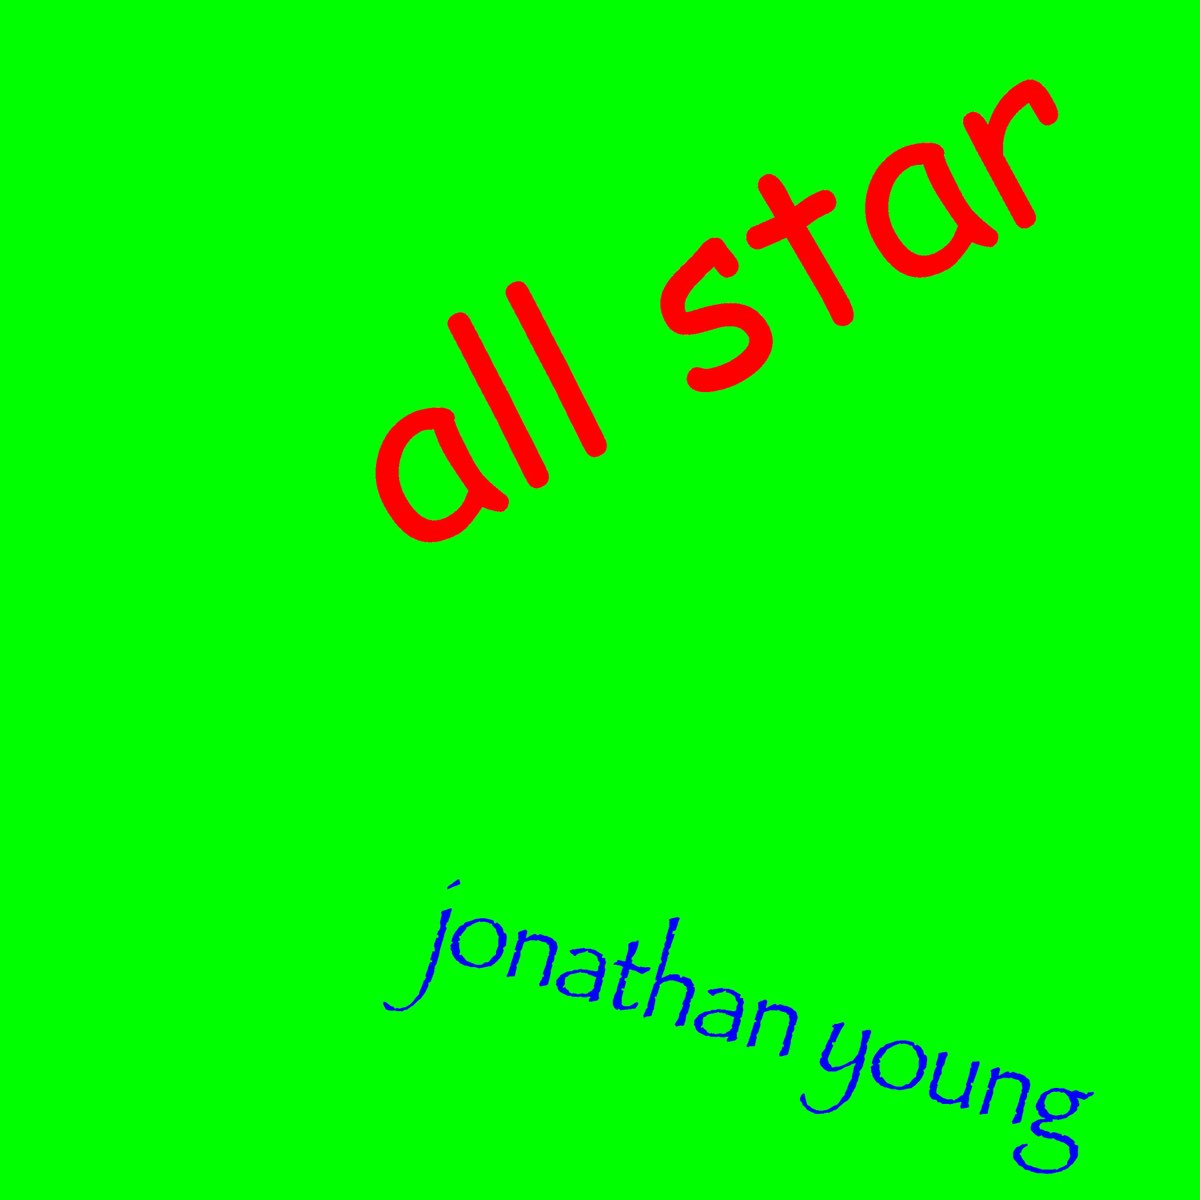 All Star - Single by Jonathan Young on Apple Music